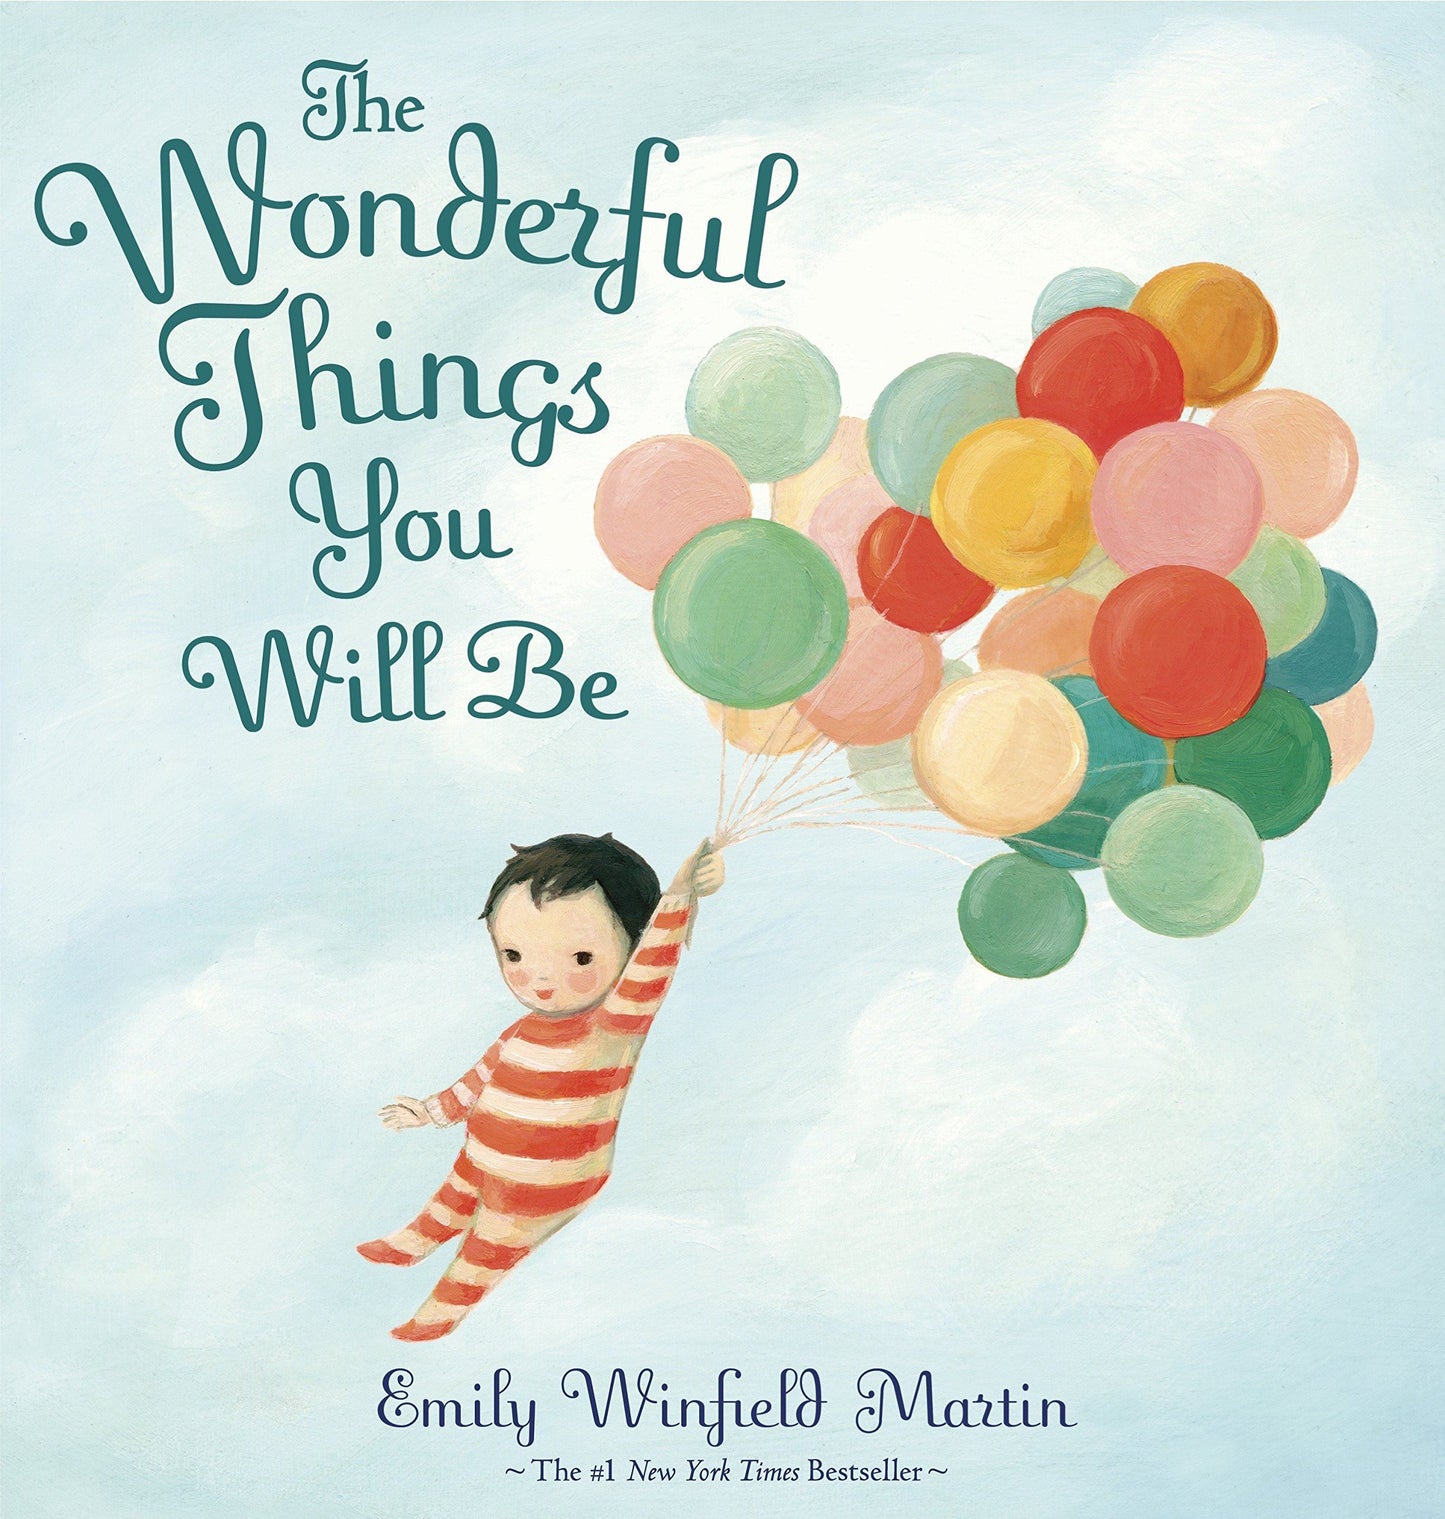 Wonderful things you will be